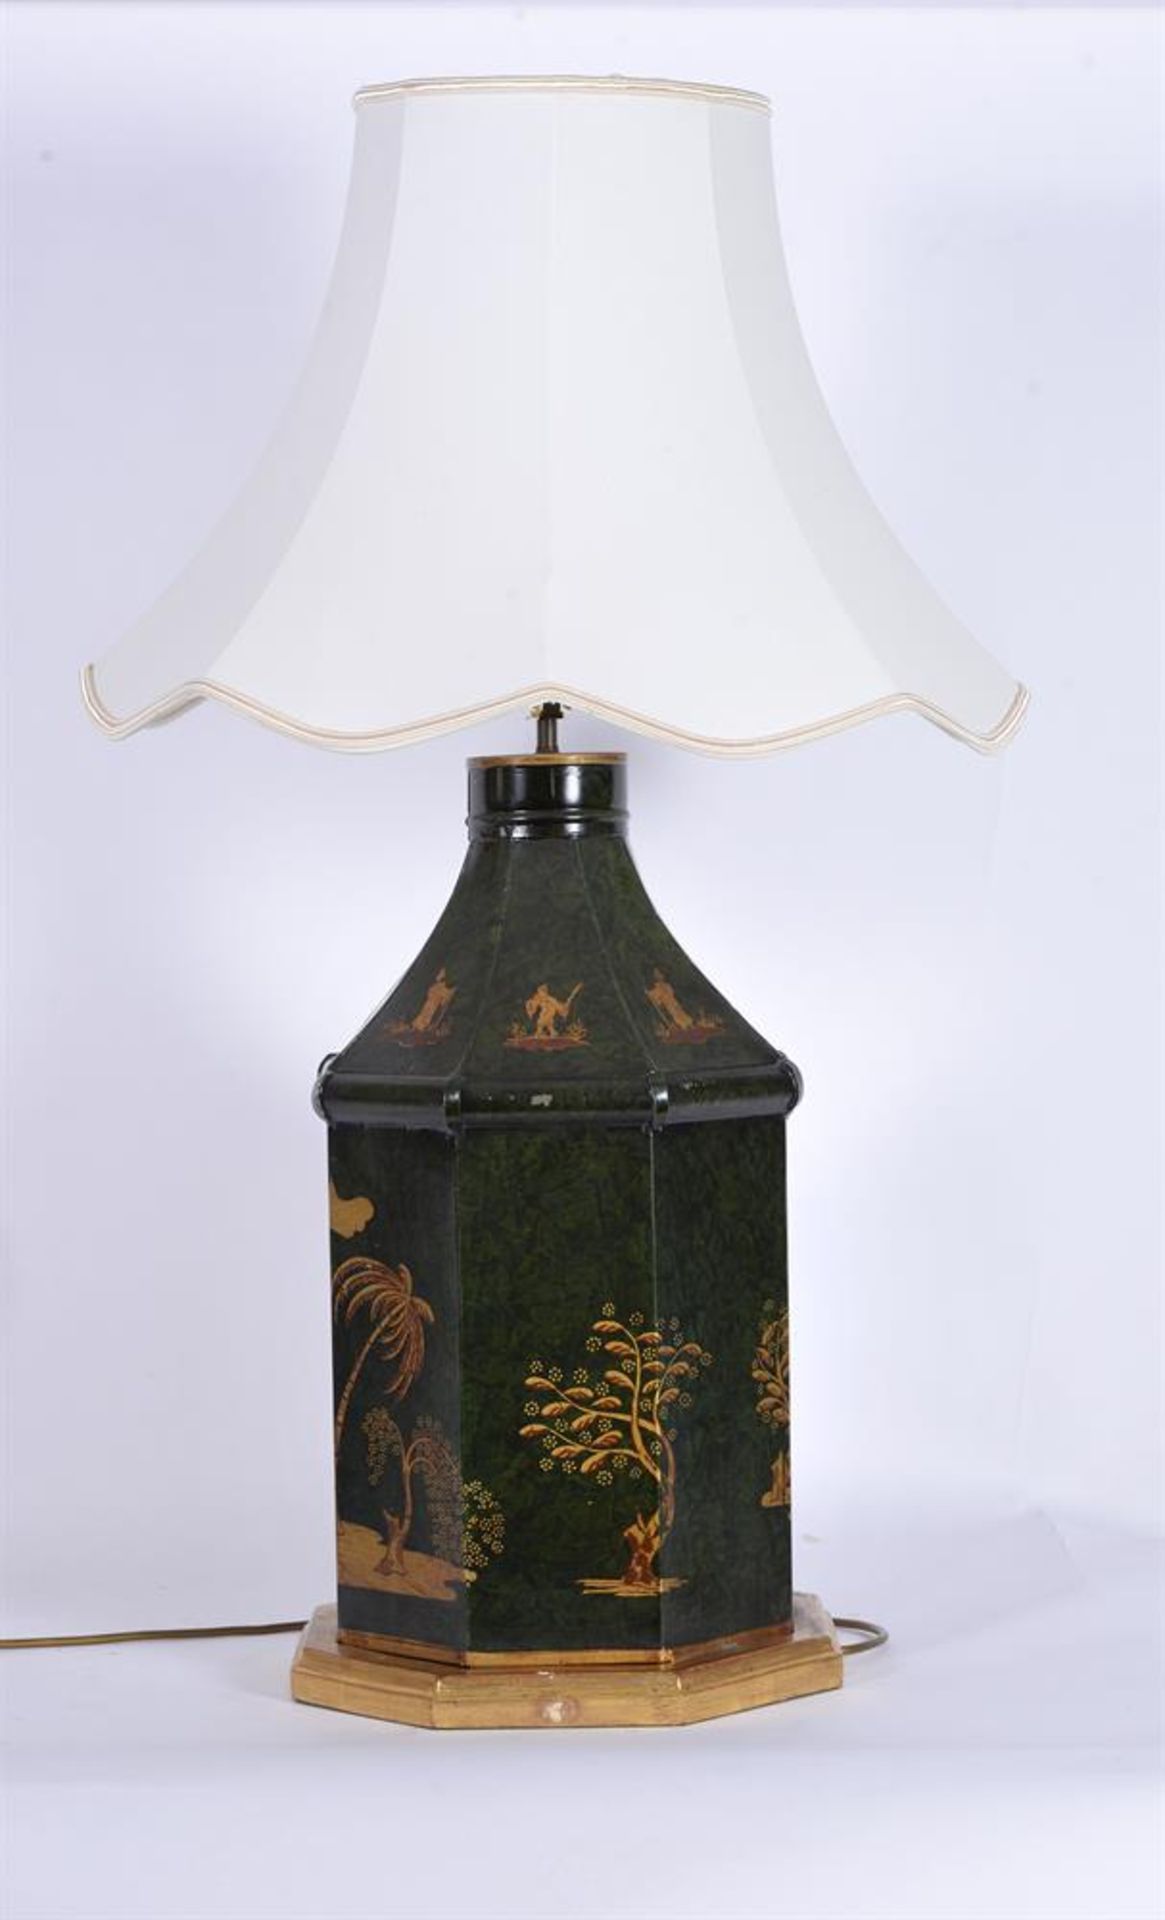 A PAIR OF GREEN AND GILT DECORATED TOLE LAMP BASES, IN THE REGENCY MANNER, MODERN - Image 4 of 5